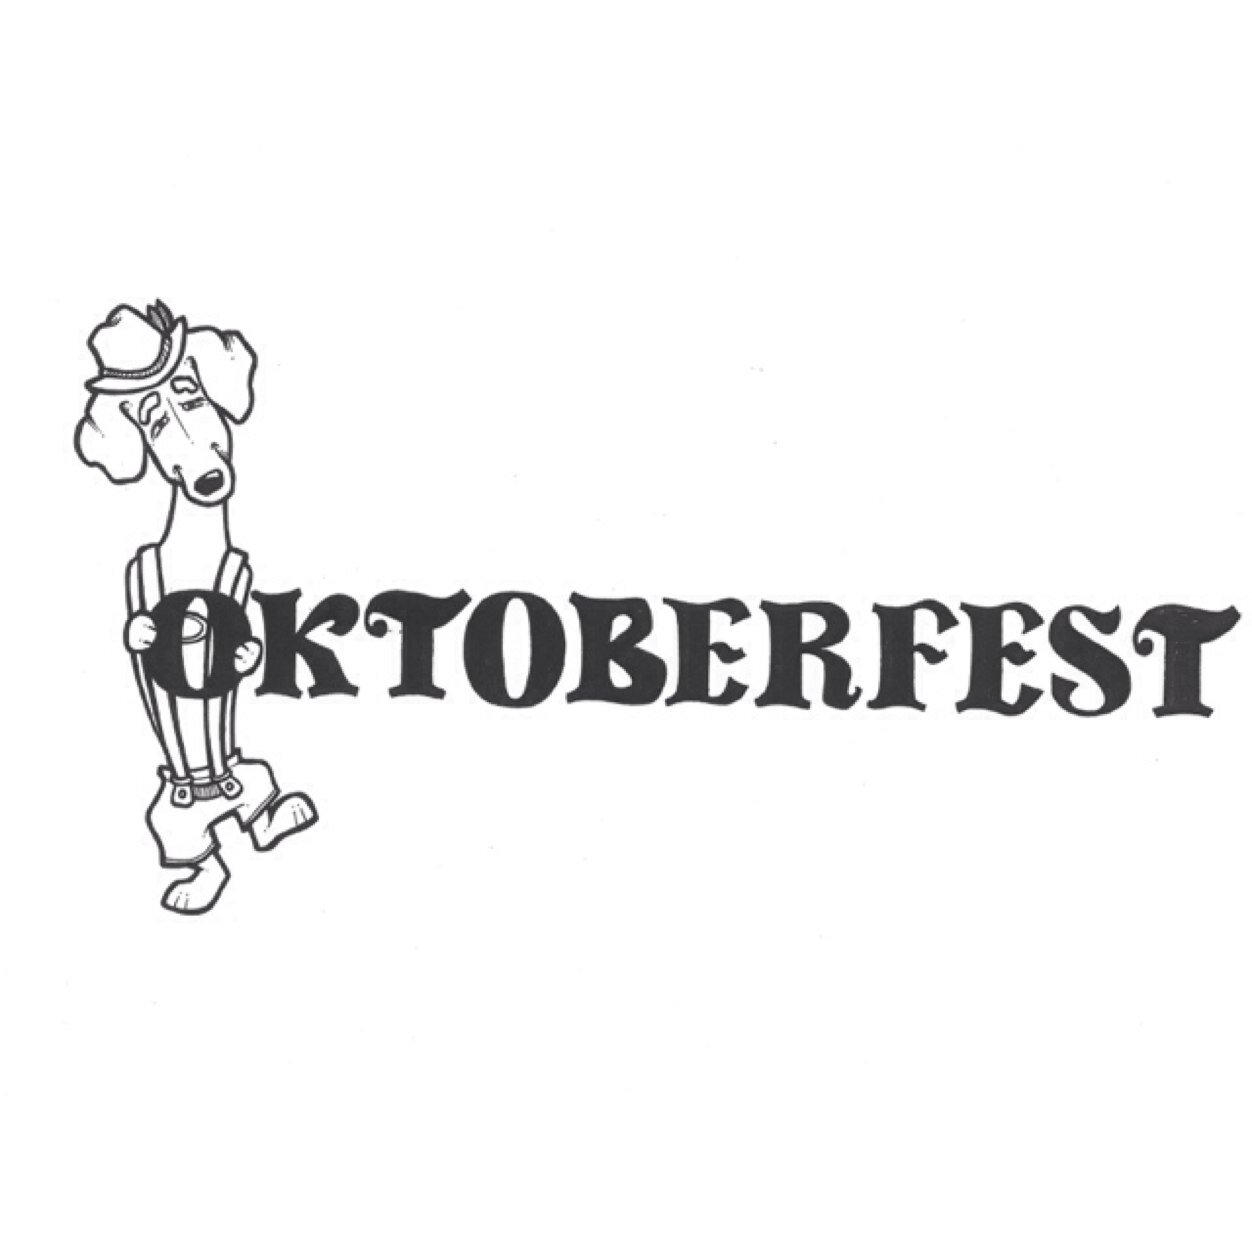 Official Twitter for the annual Jefferson City Oktoberfest! Hosted in the beautiful historic Old Munichburg District every last weekend in September!